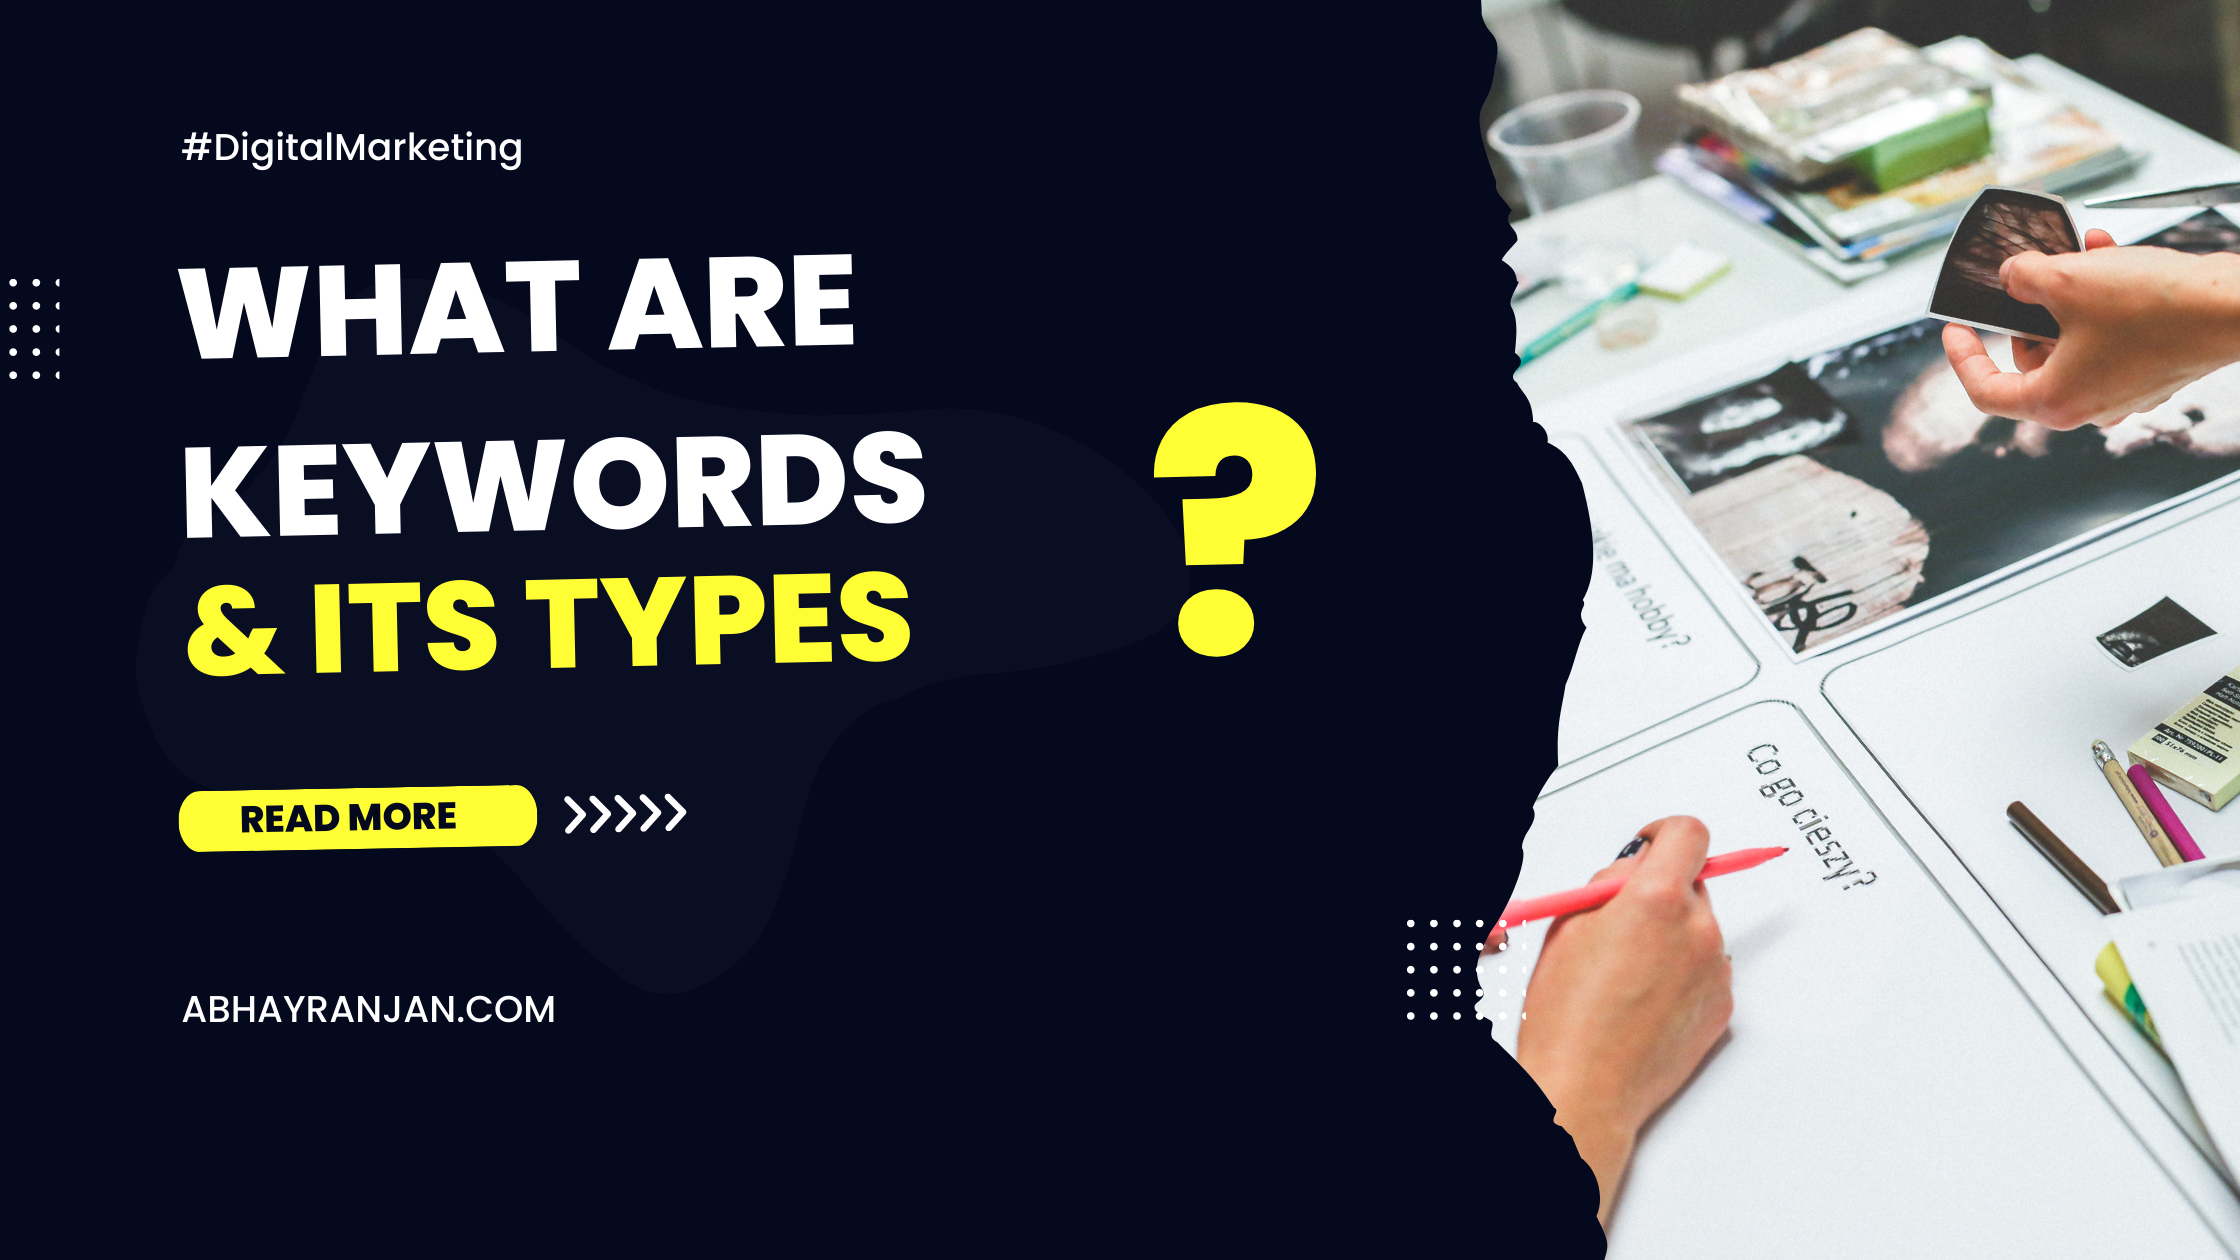 Keywords and types of keywords